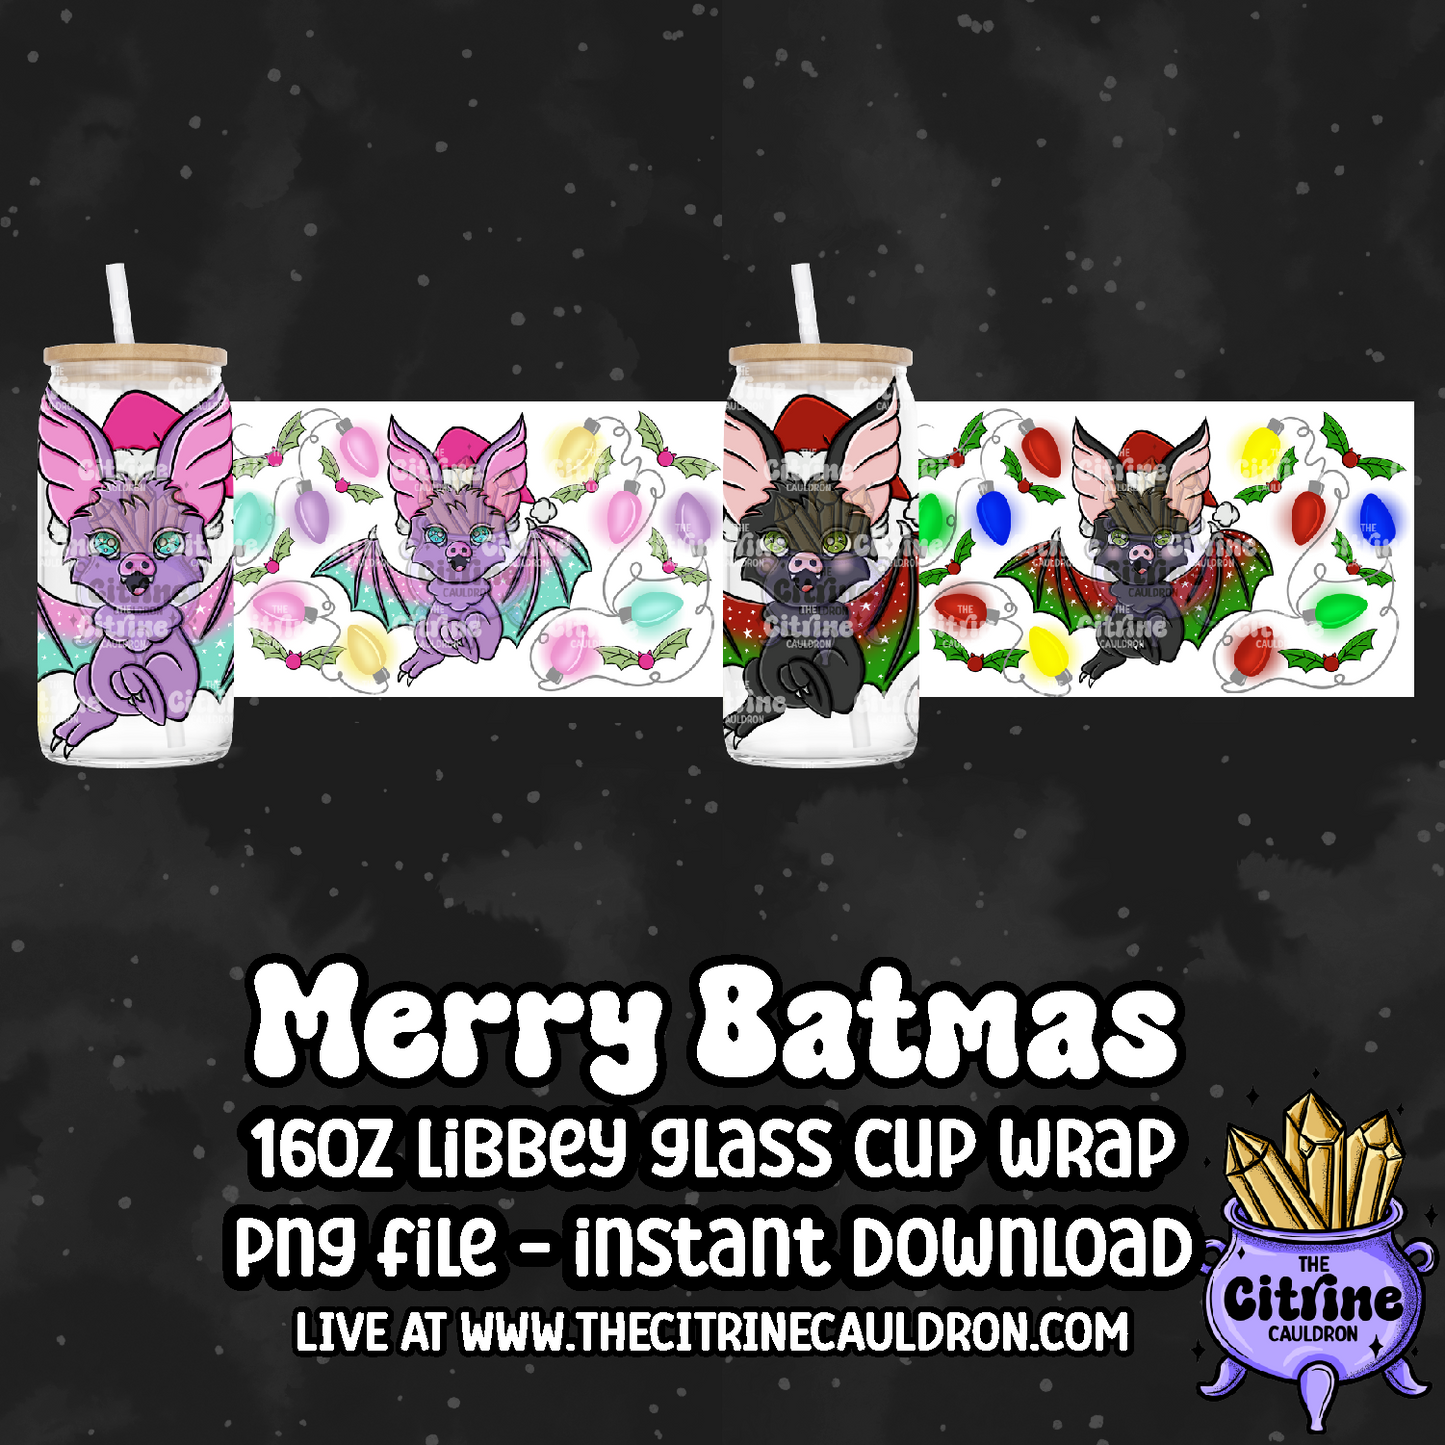 Merry Batmas - PNG Wrap for Libbey 16oz Glass Can